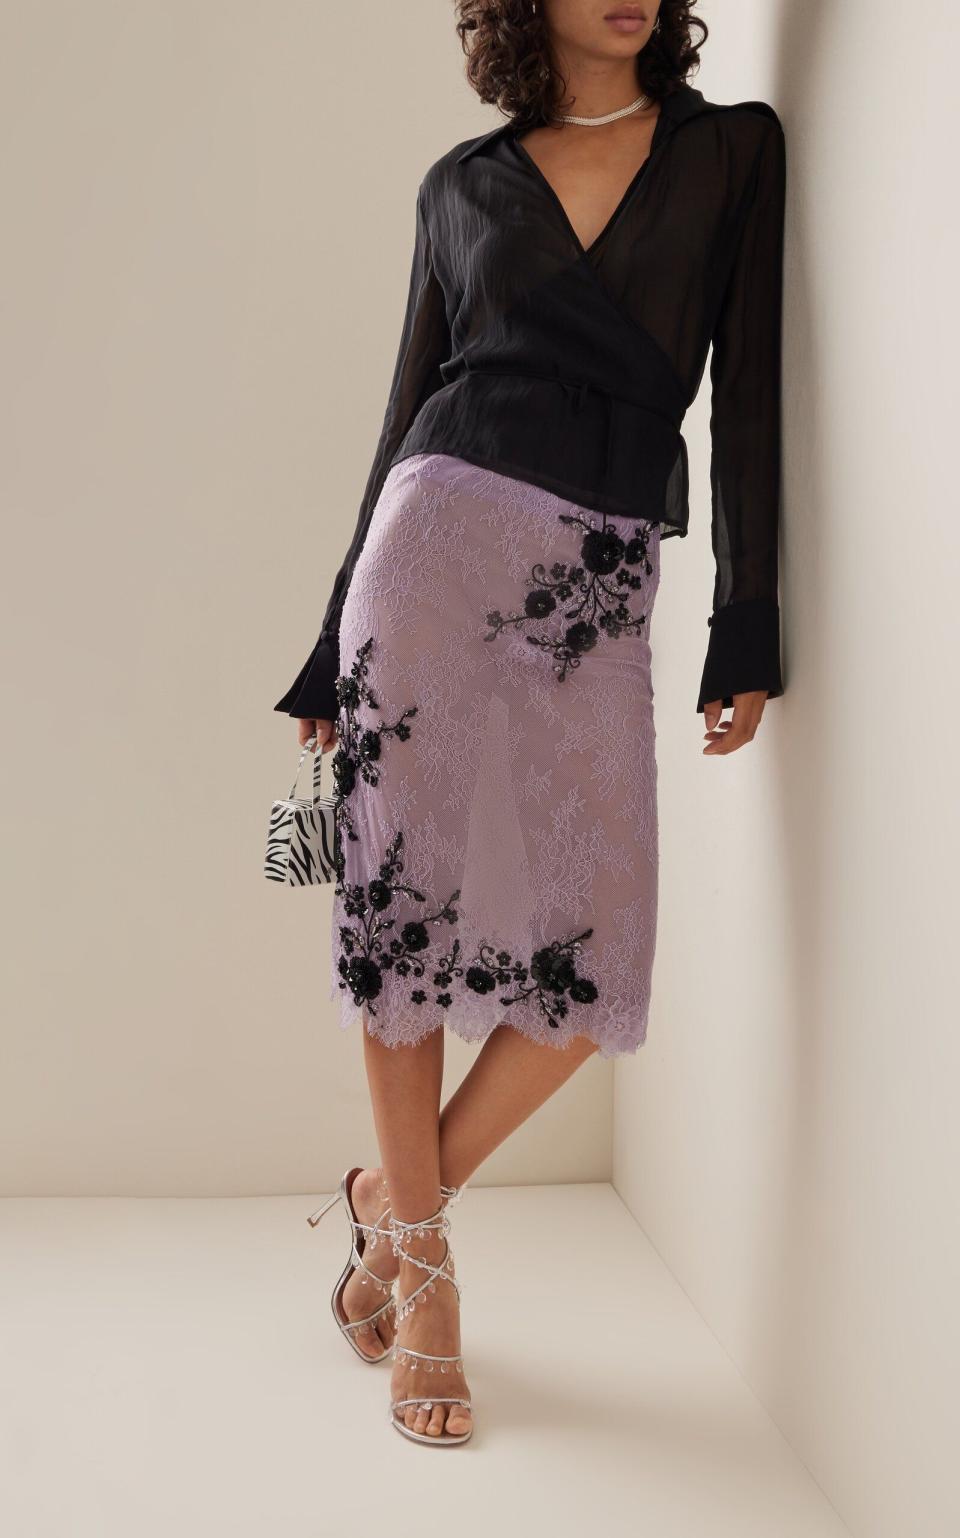 5) Lace Embroidered Midi Skirt